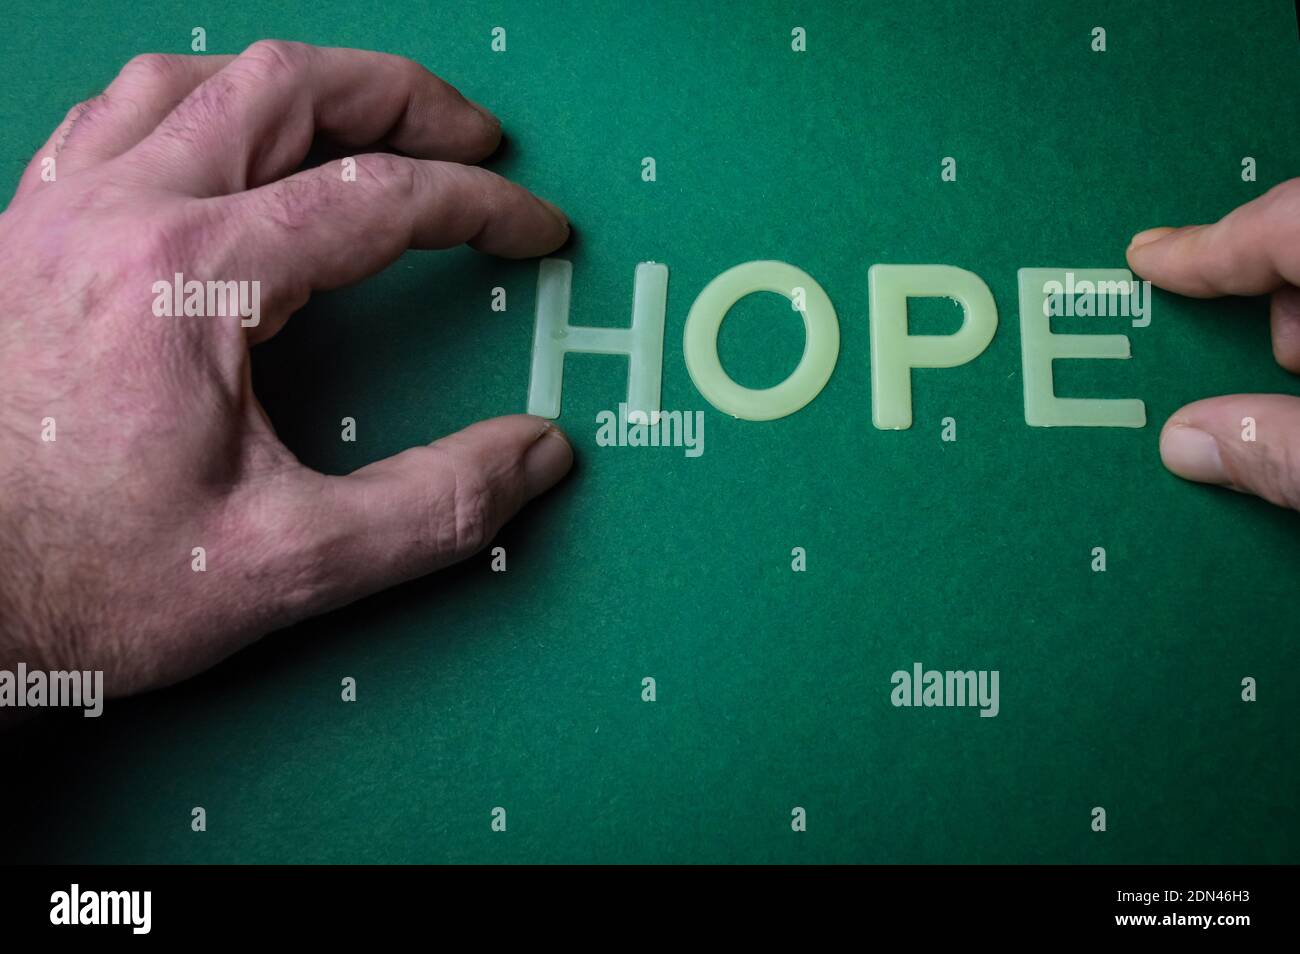 Human hand holding the word Hope written with plastic letters on green paper background, concept Stock Photo